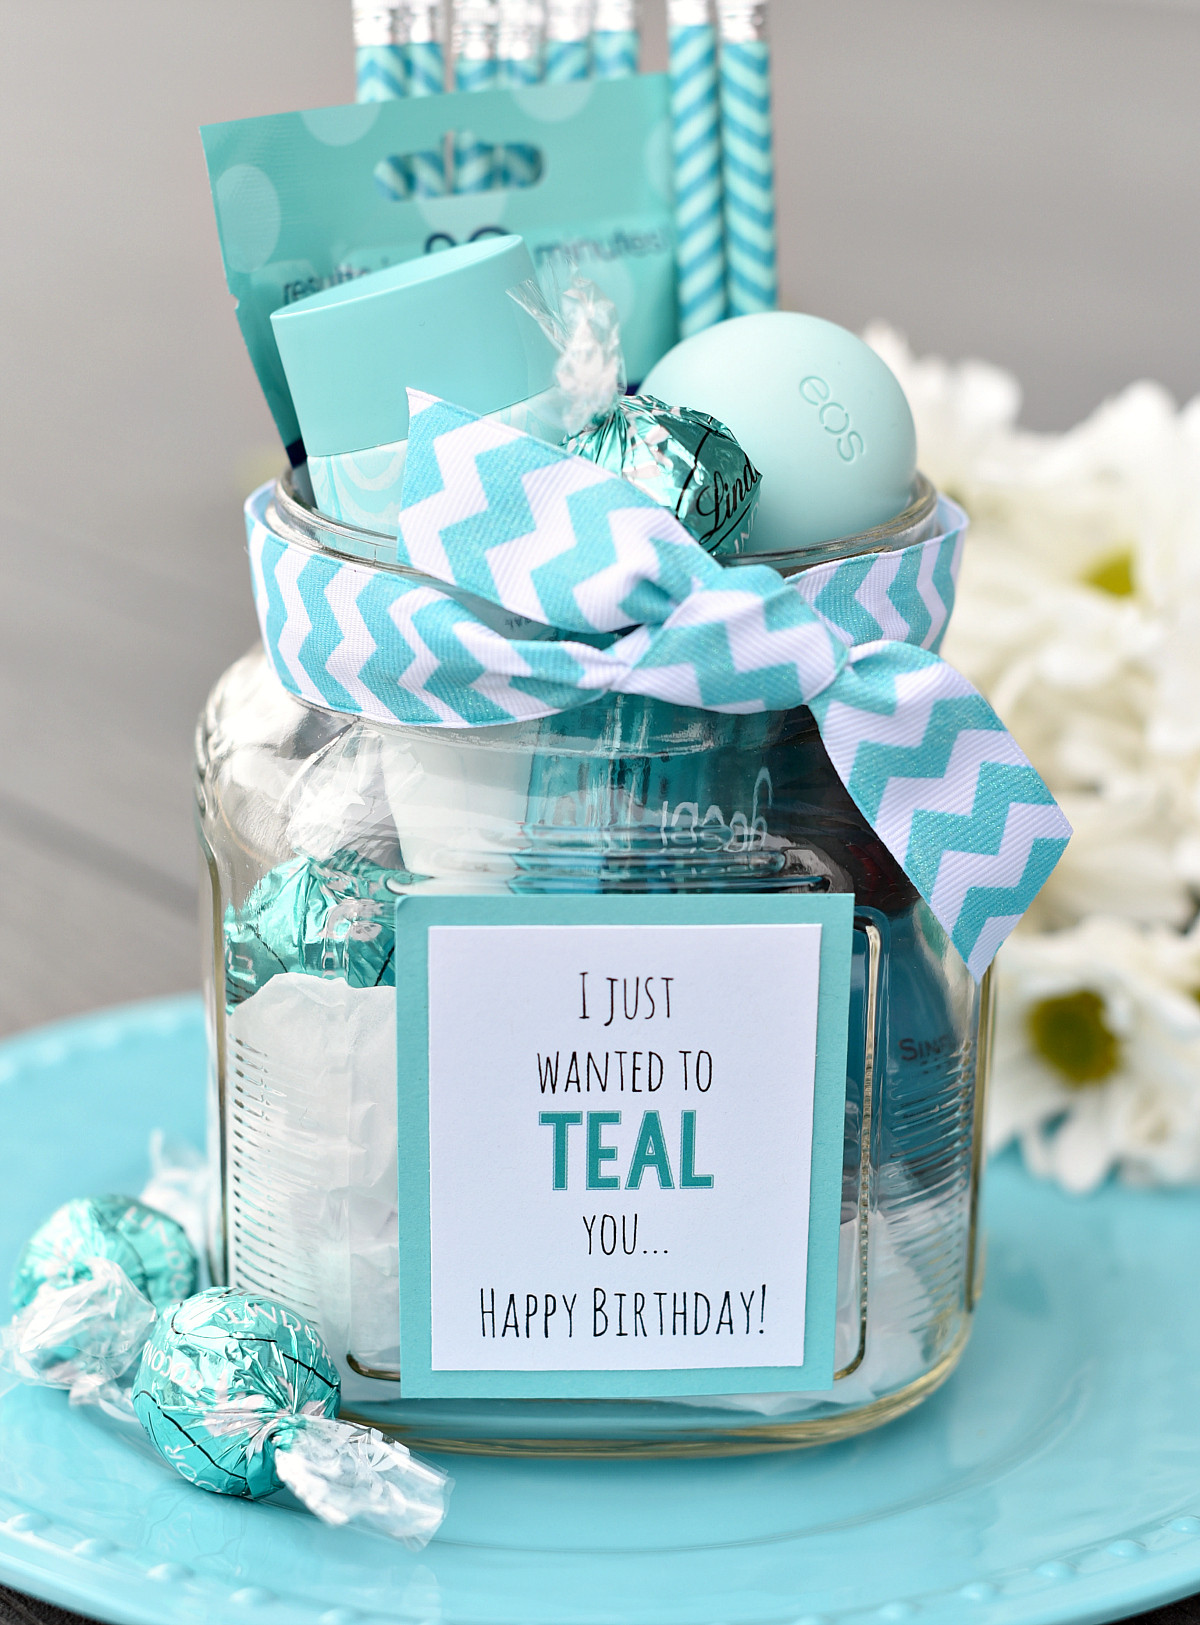 Best Friend Gift Ideas Pinterest
 Teal Birthday Gift Idea for Friends – Fun Squared